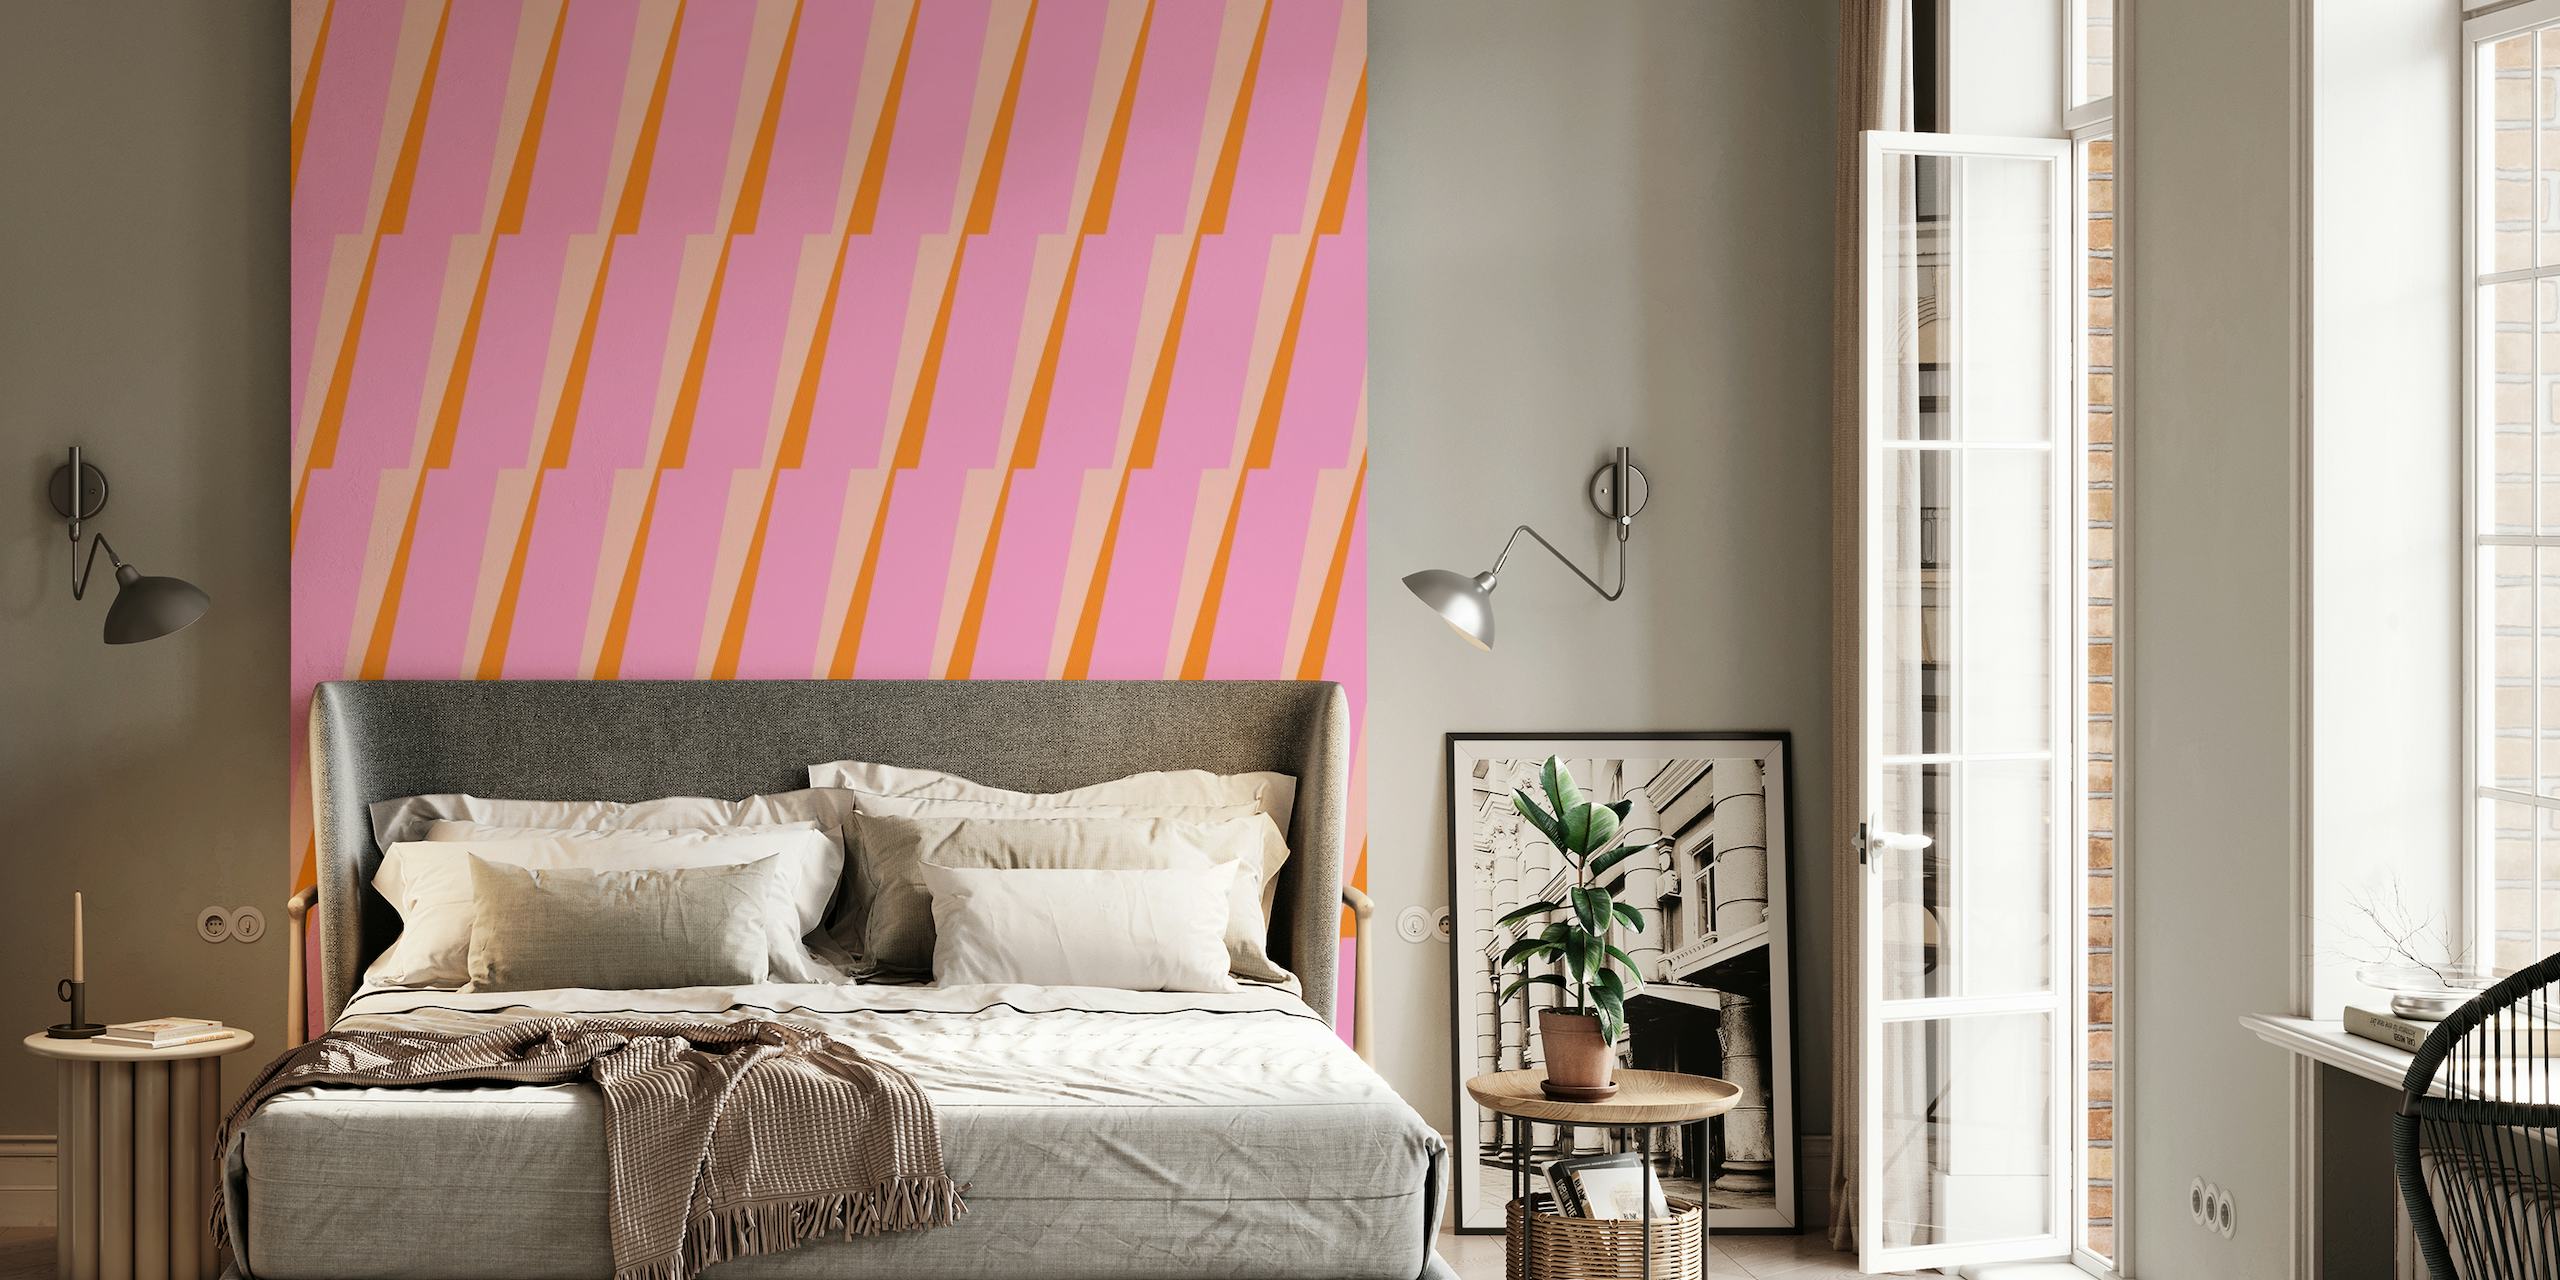 Pink and Orange Geometric Shapes Wall Mural